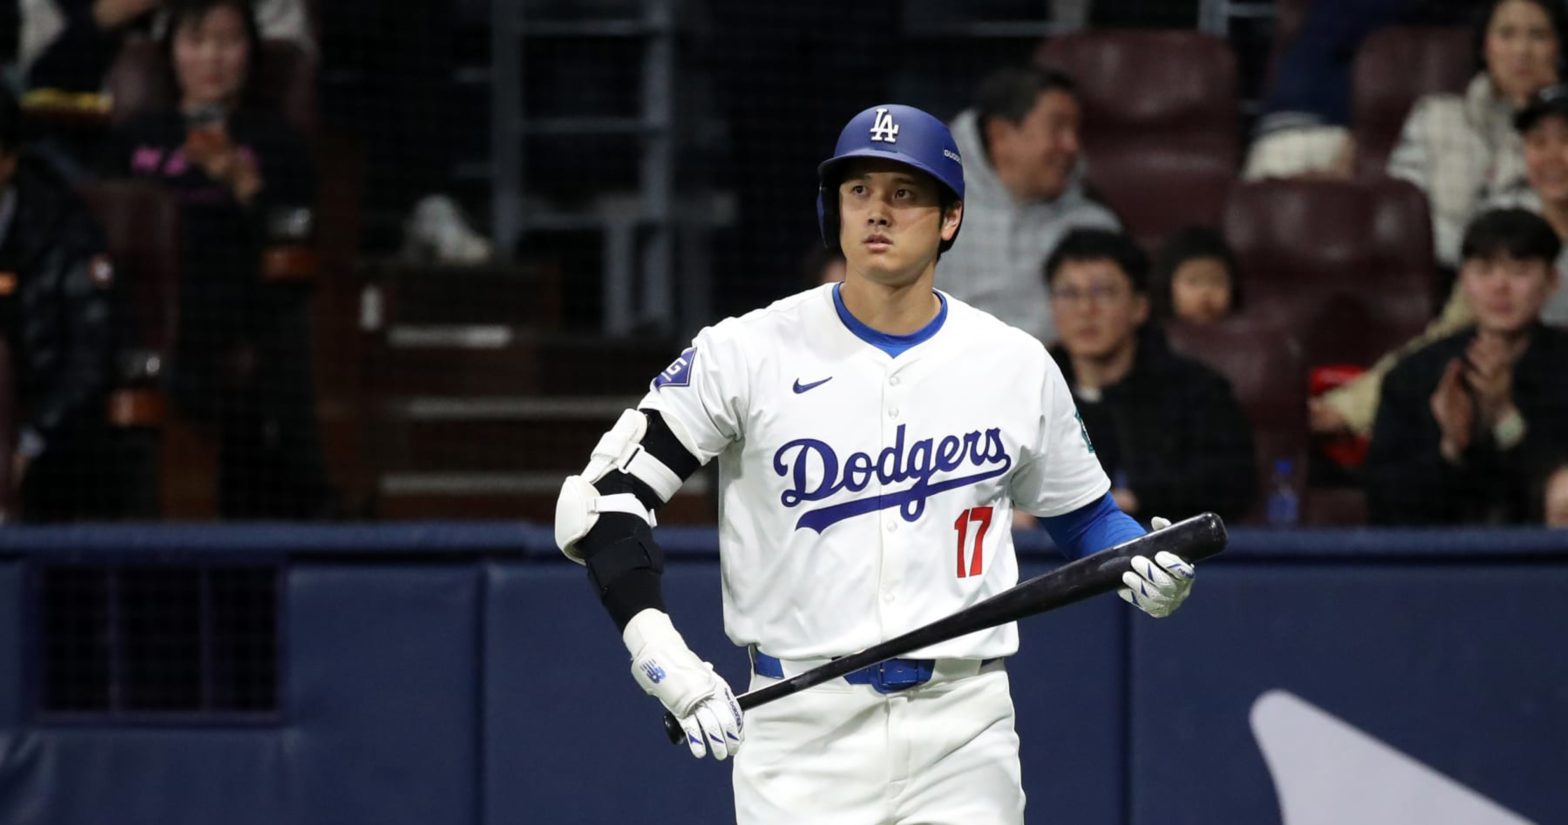 Dodgers Star Shohei Ohtani’s Signature Logo for New Balance Revealed in Video